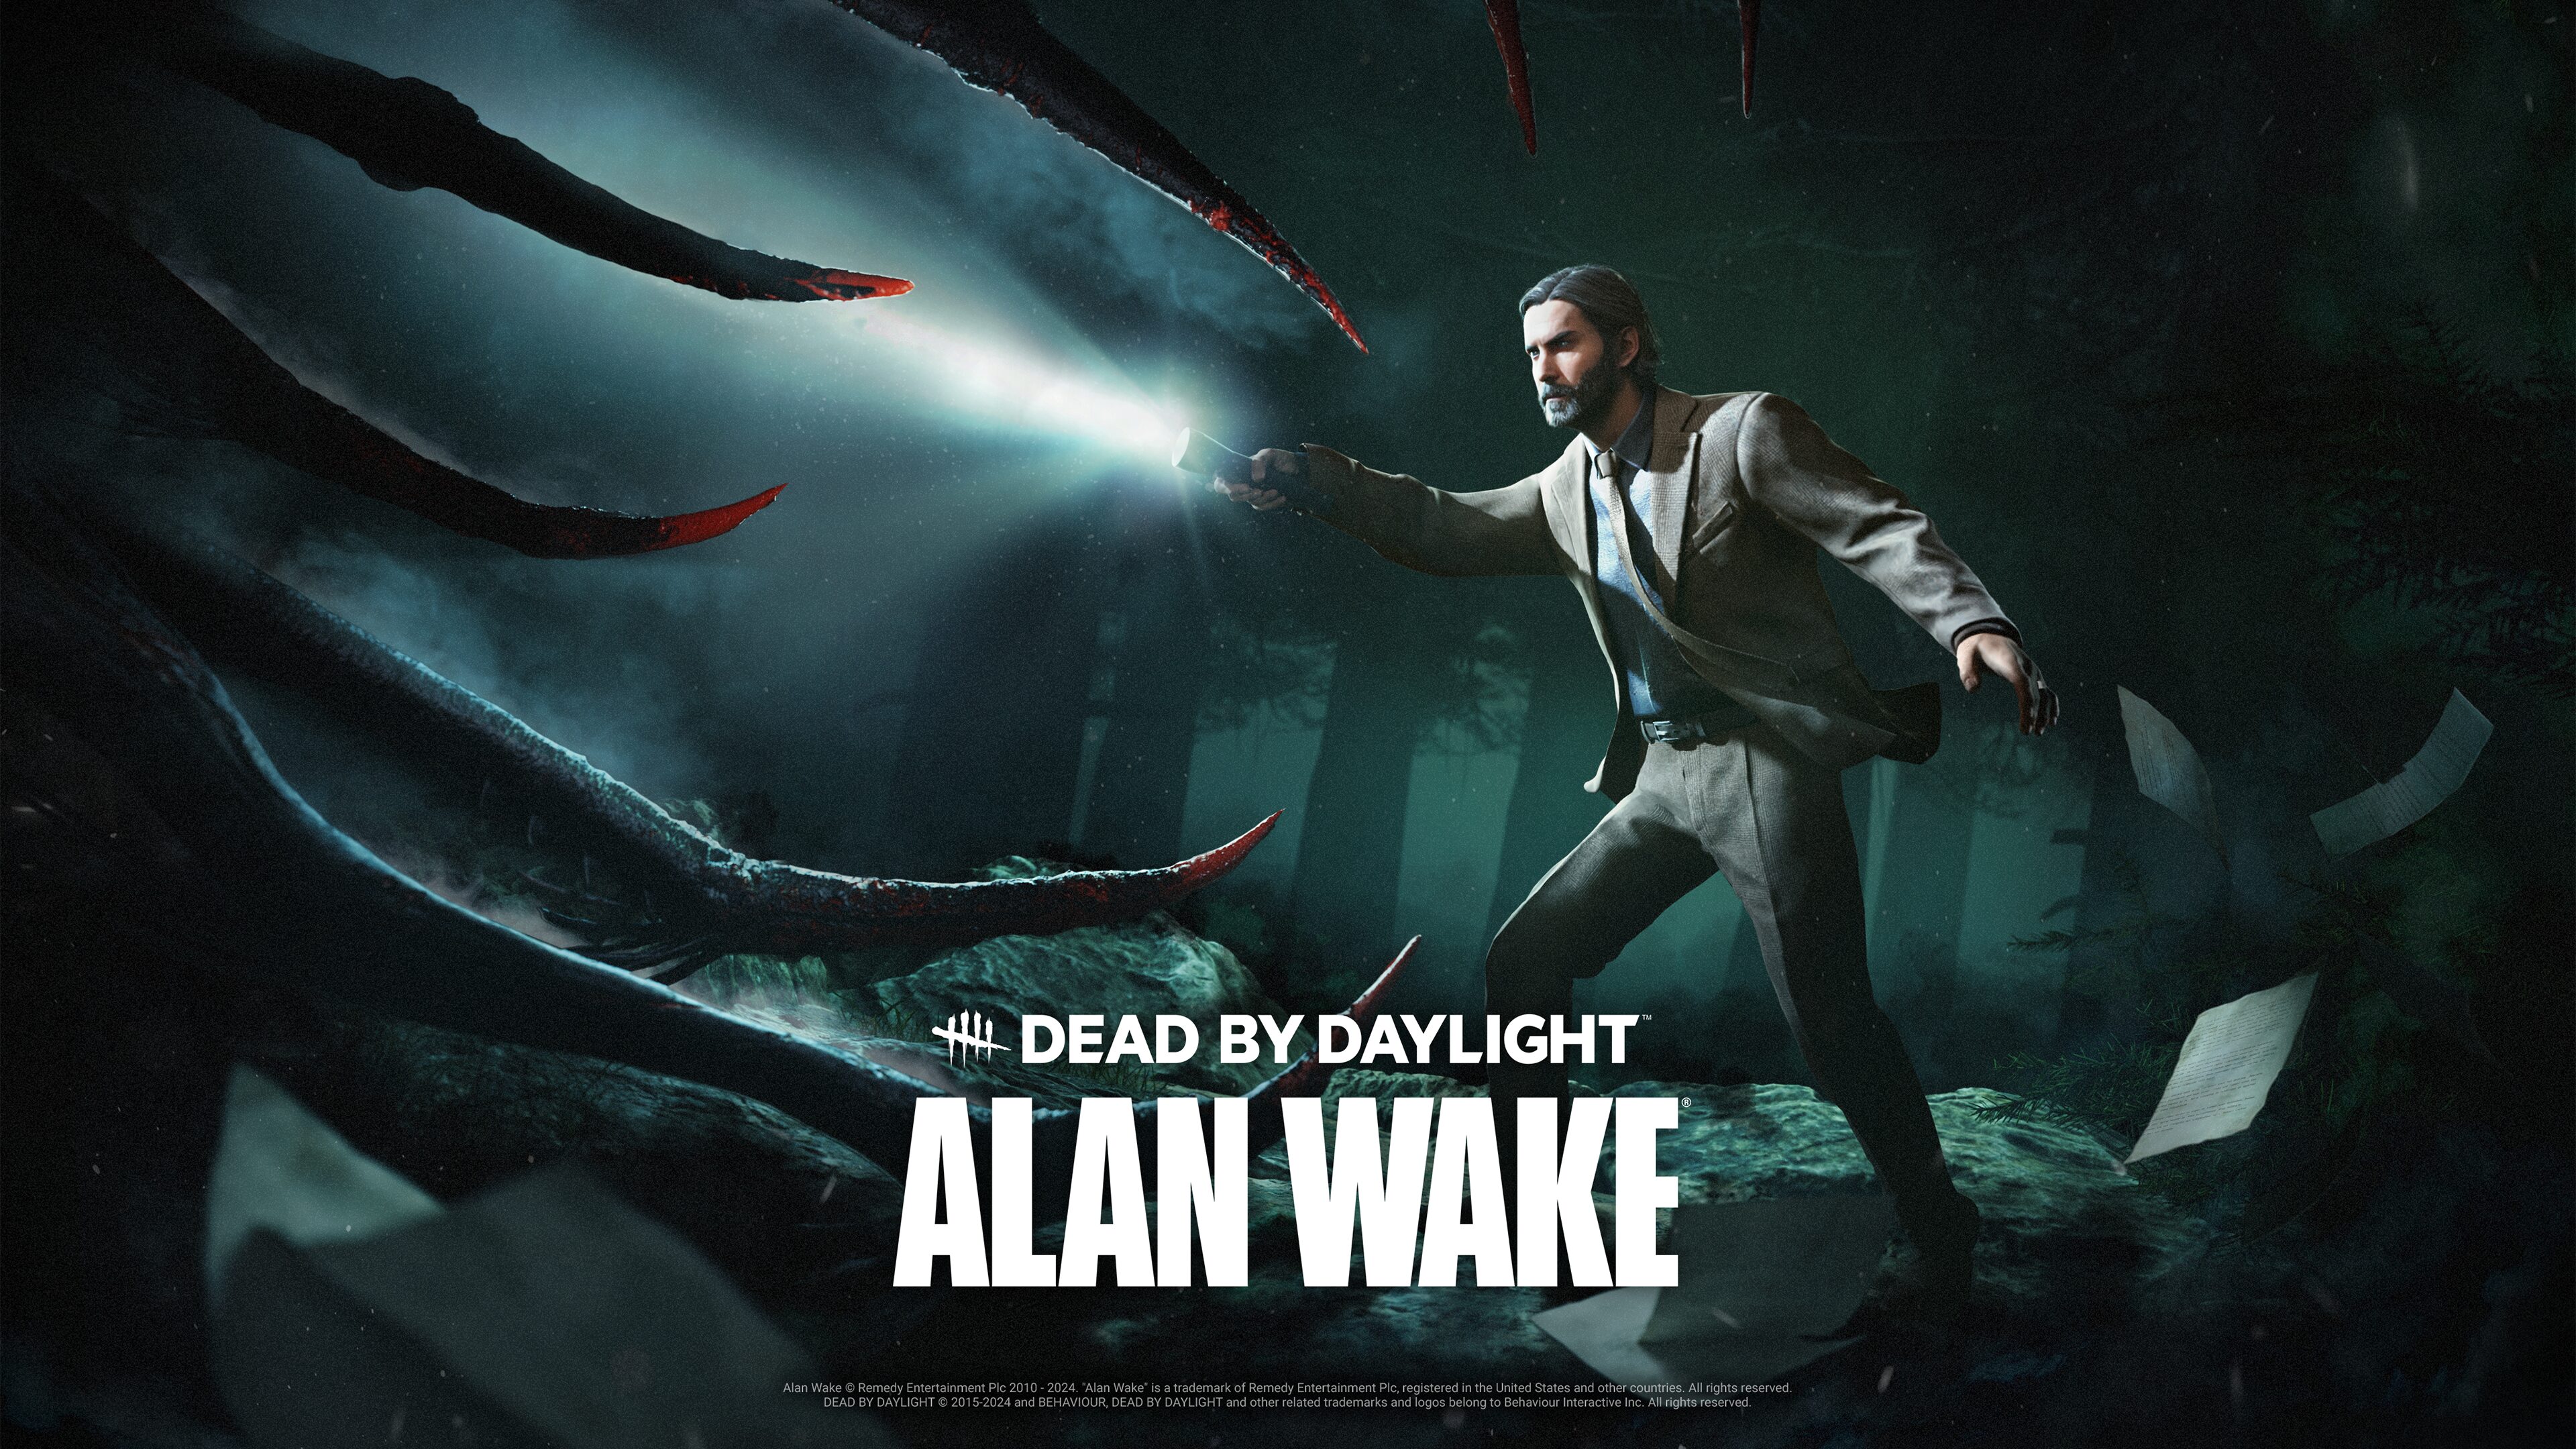 Alan Wake is coming to Dead By Daylight later this month VGC